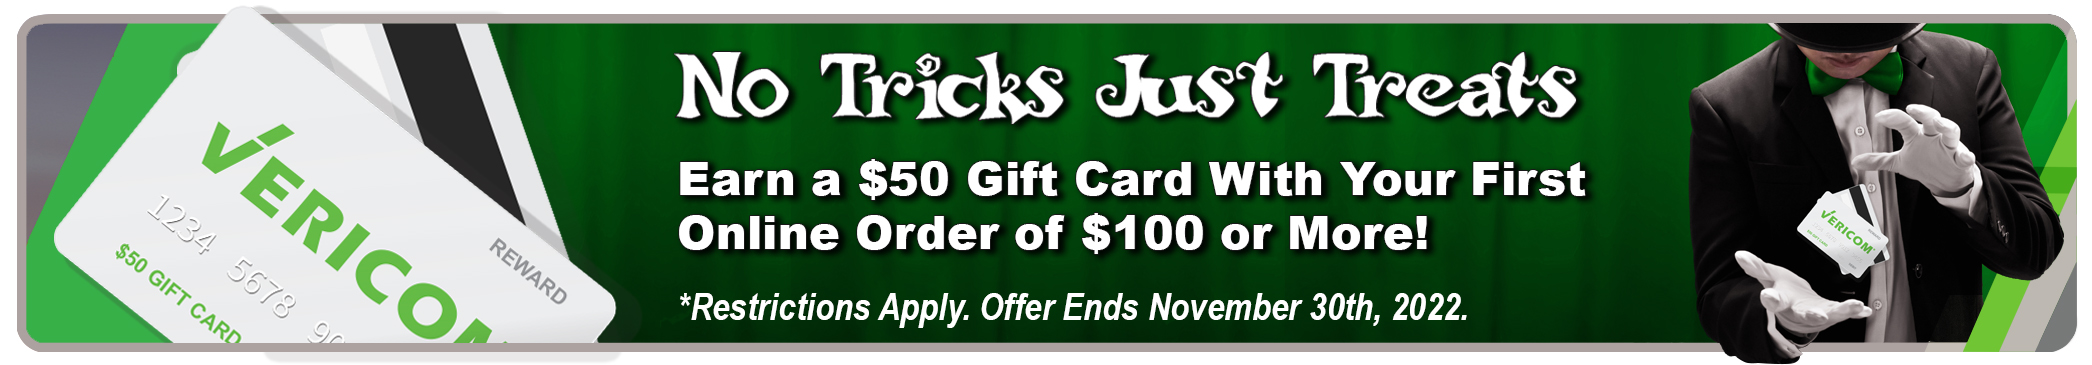 OCTOBER 2022 PROMO: EARN A $50 GIFT CARD WITH YOUR FIRST ONLINE ORDER OF $100 OR MORE